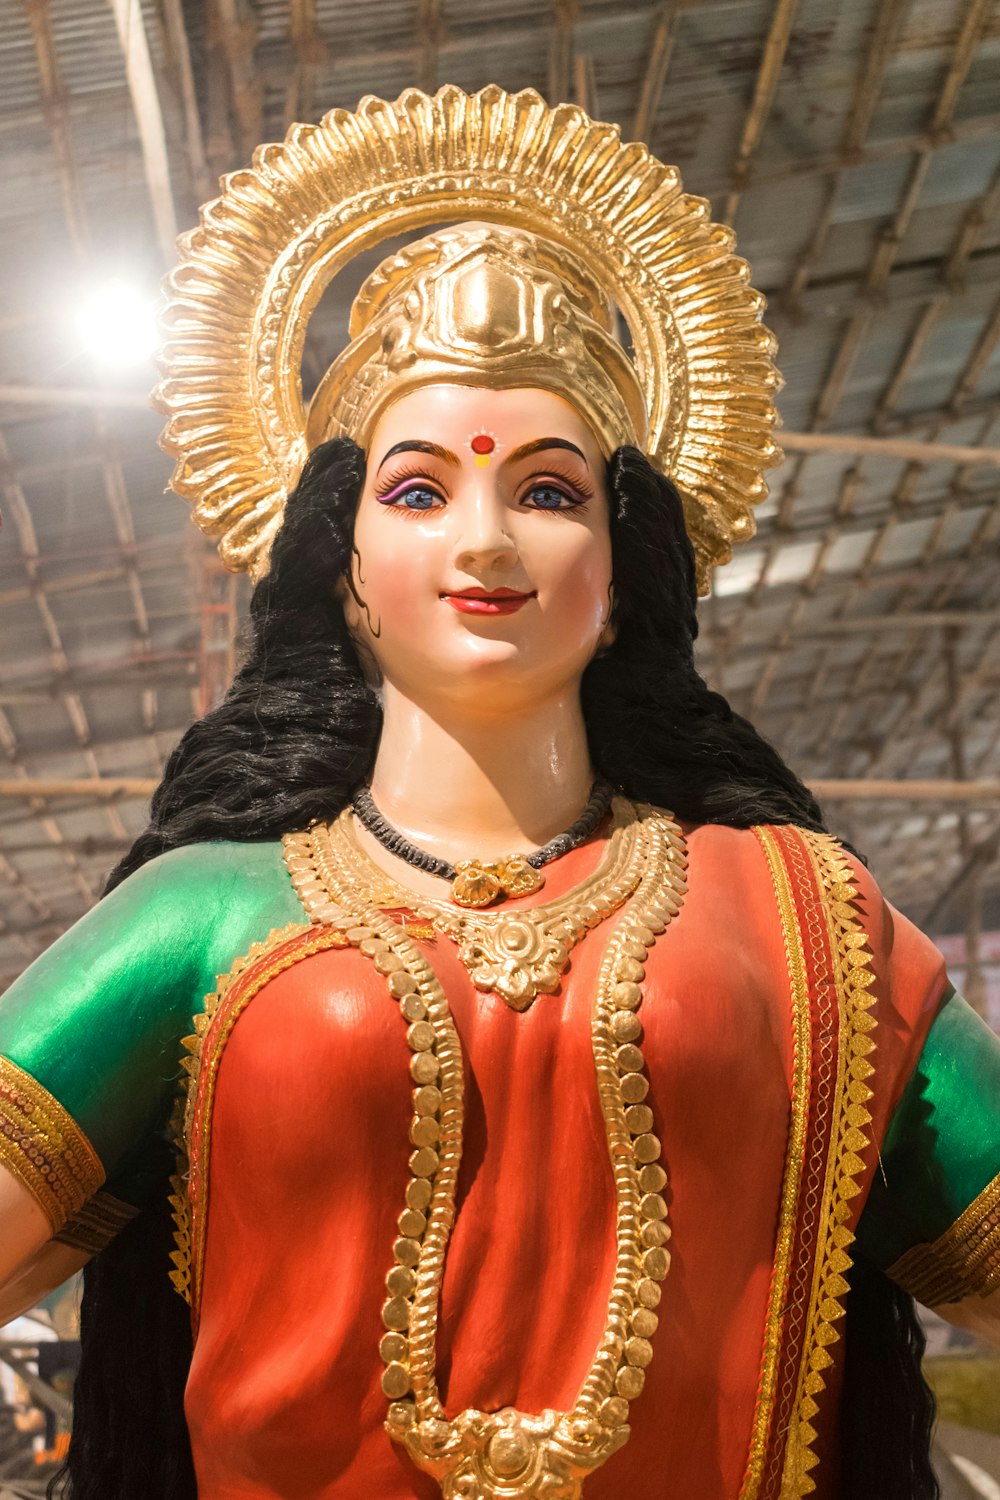 a statue of a woman in a red and green outfit